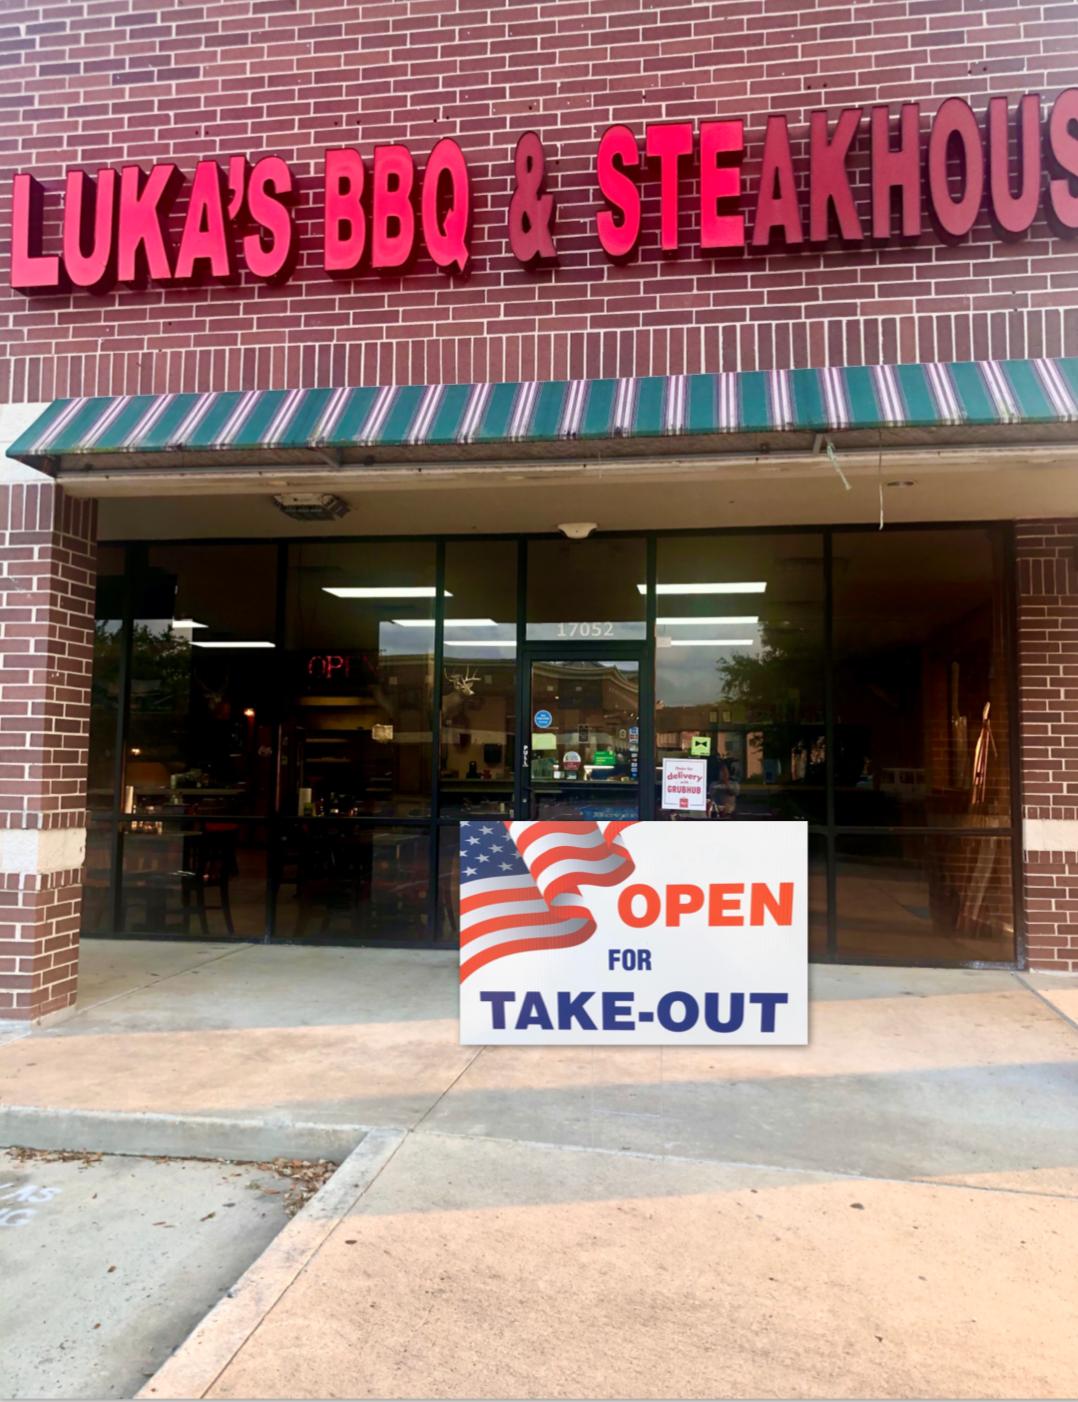 Luka's Barbecue & Steakhouse inc